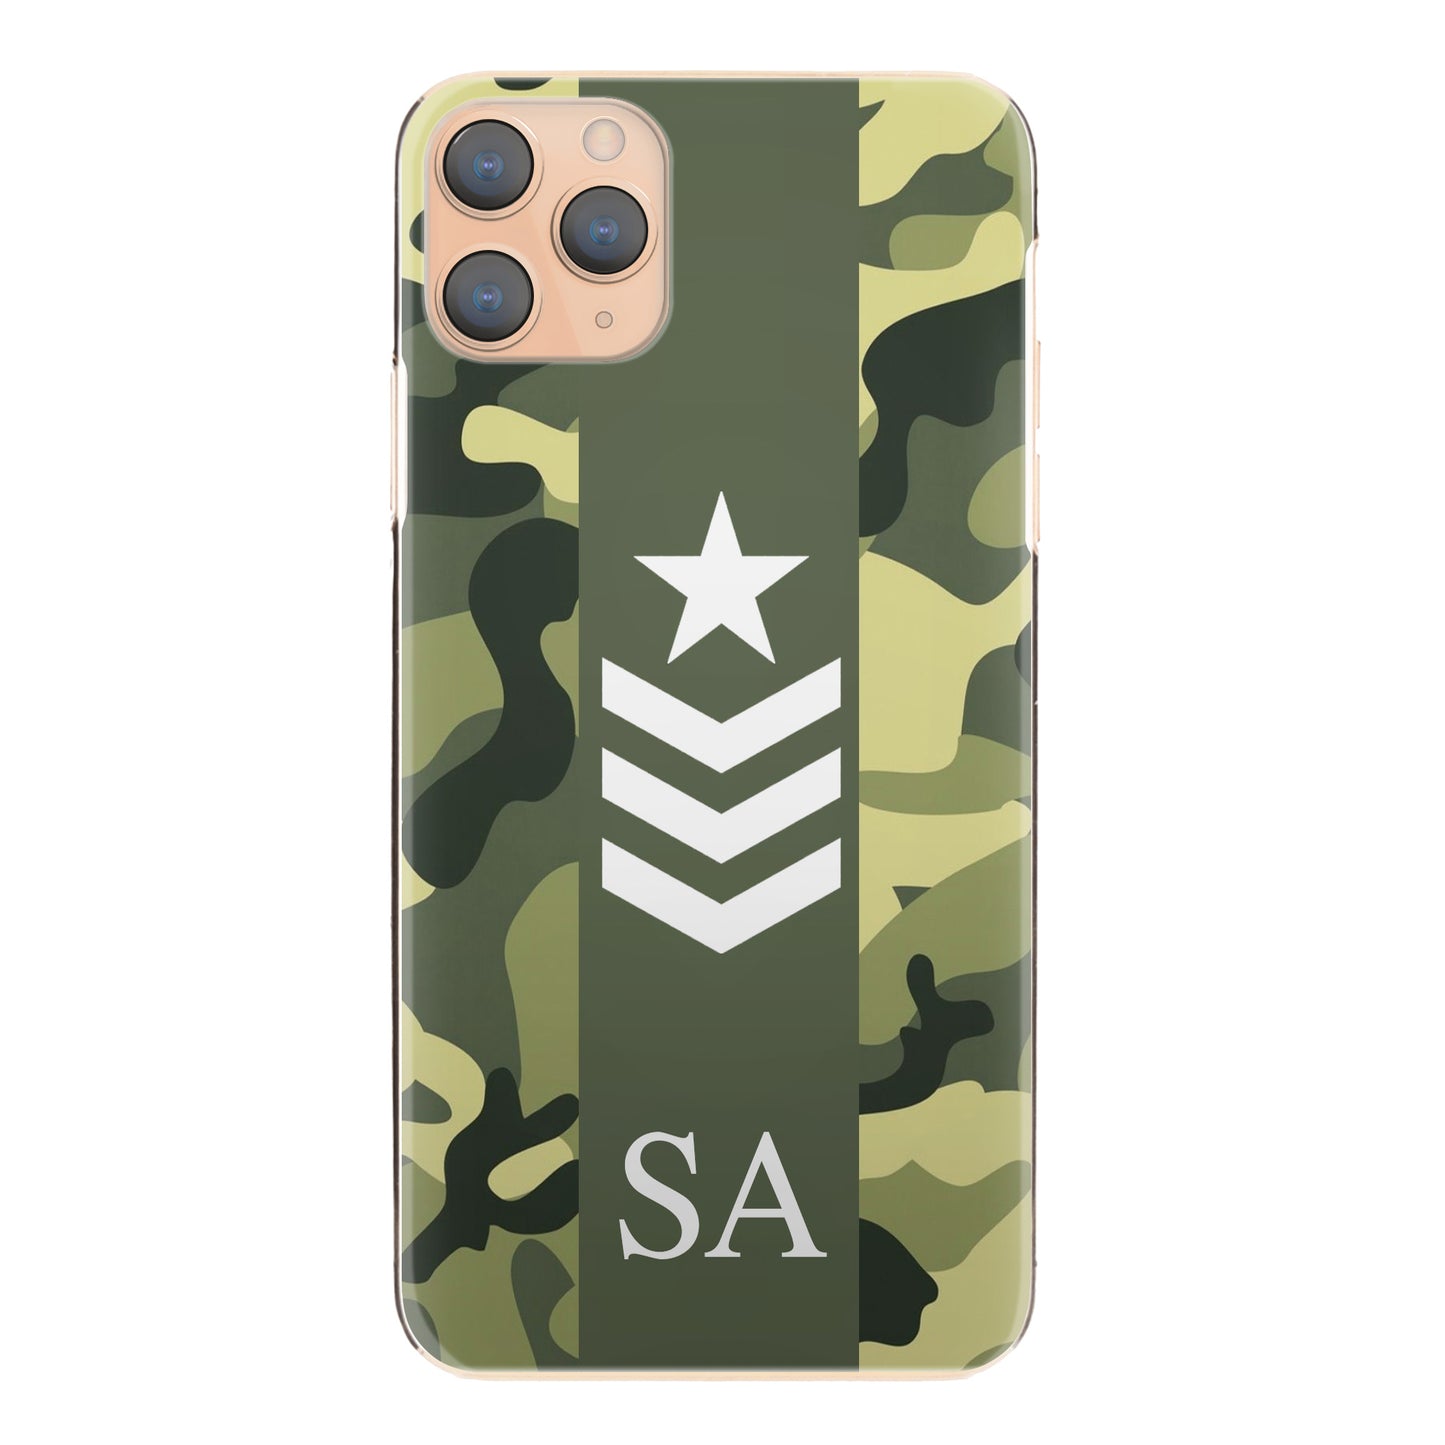 Personalised Nokia Phone Hard Case with Initials and Army Rank on Classic Green Camo